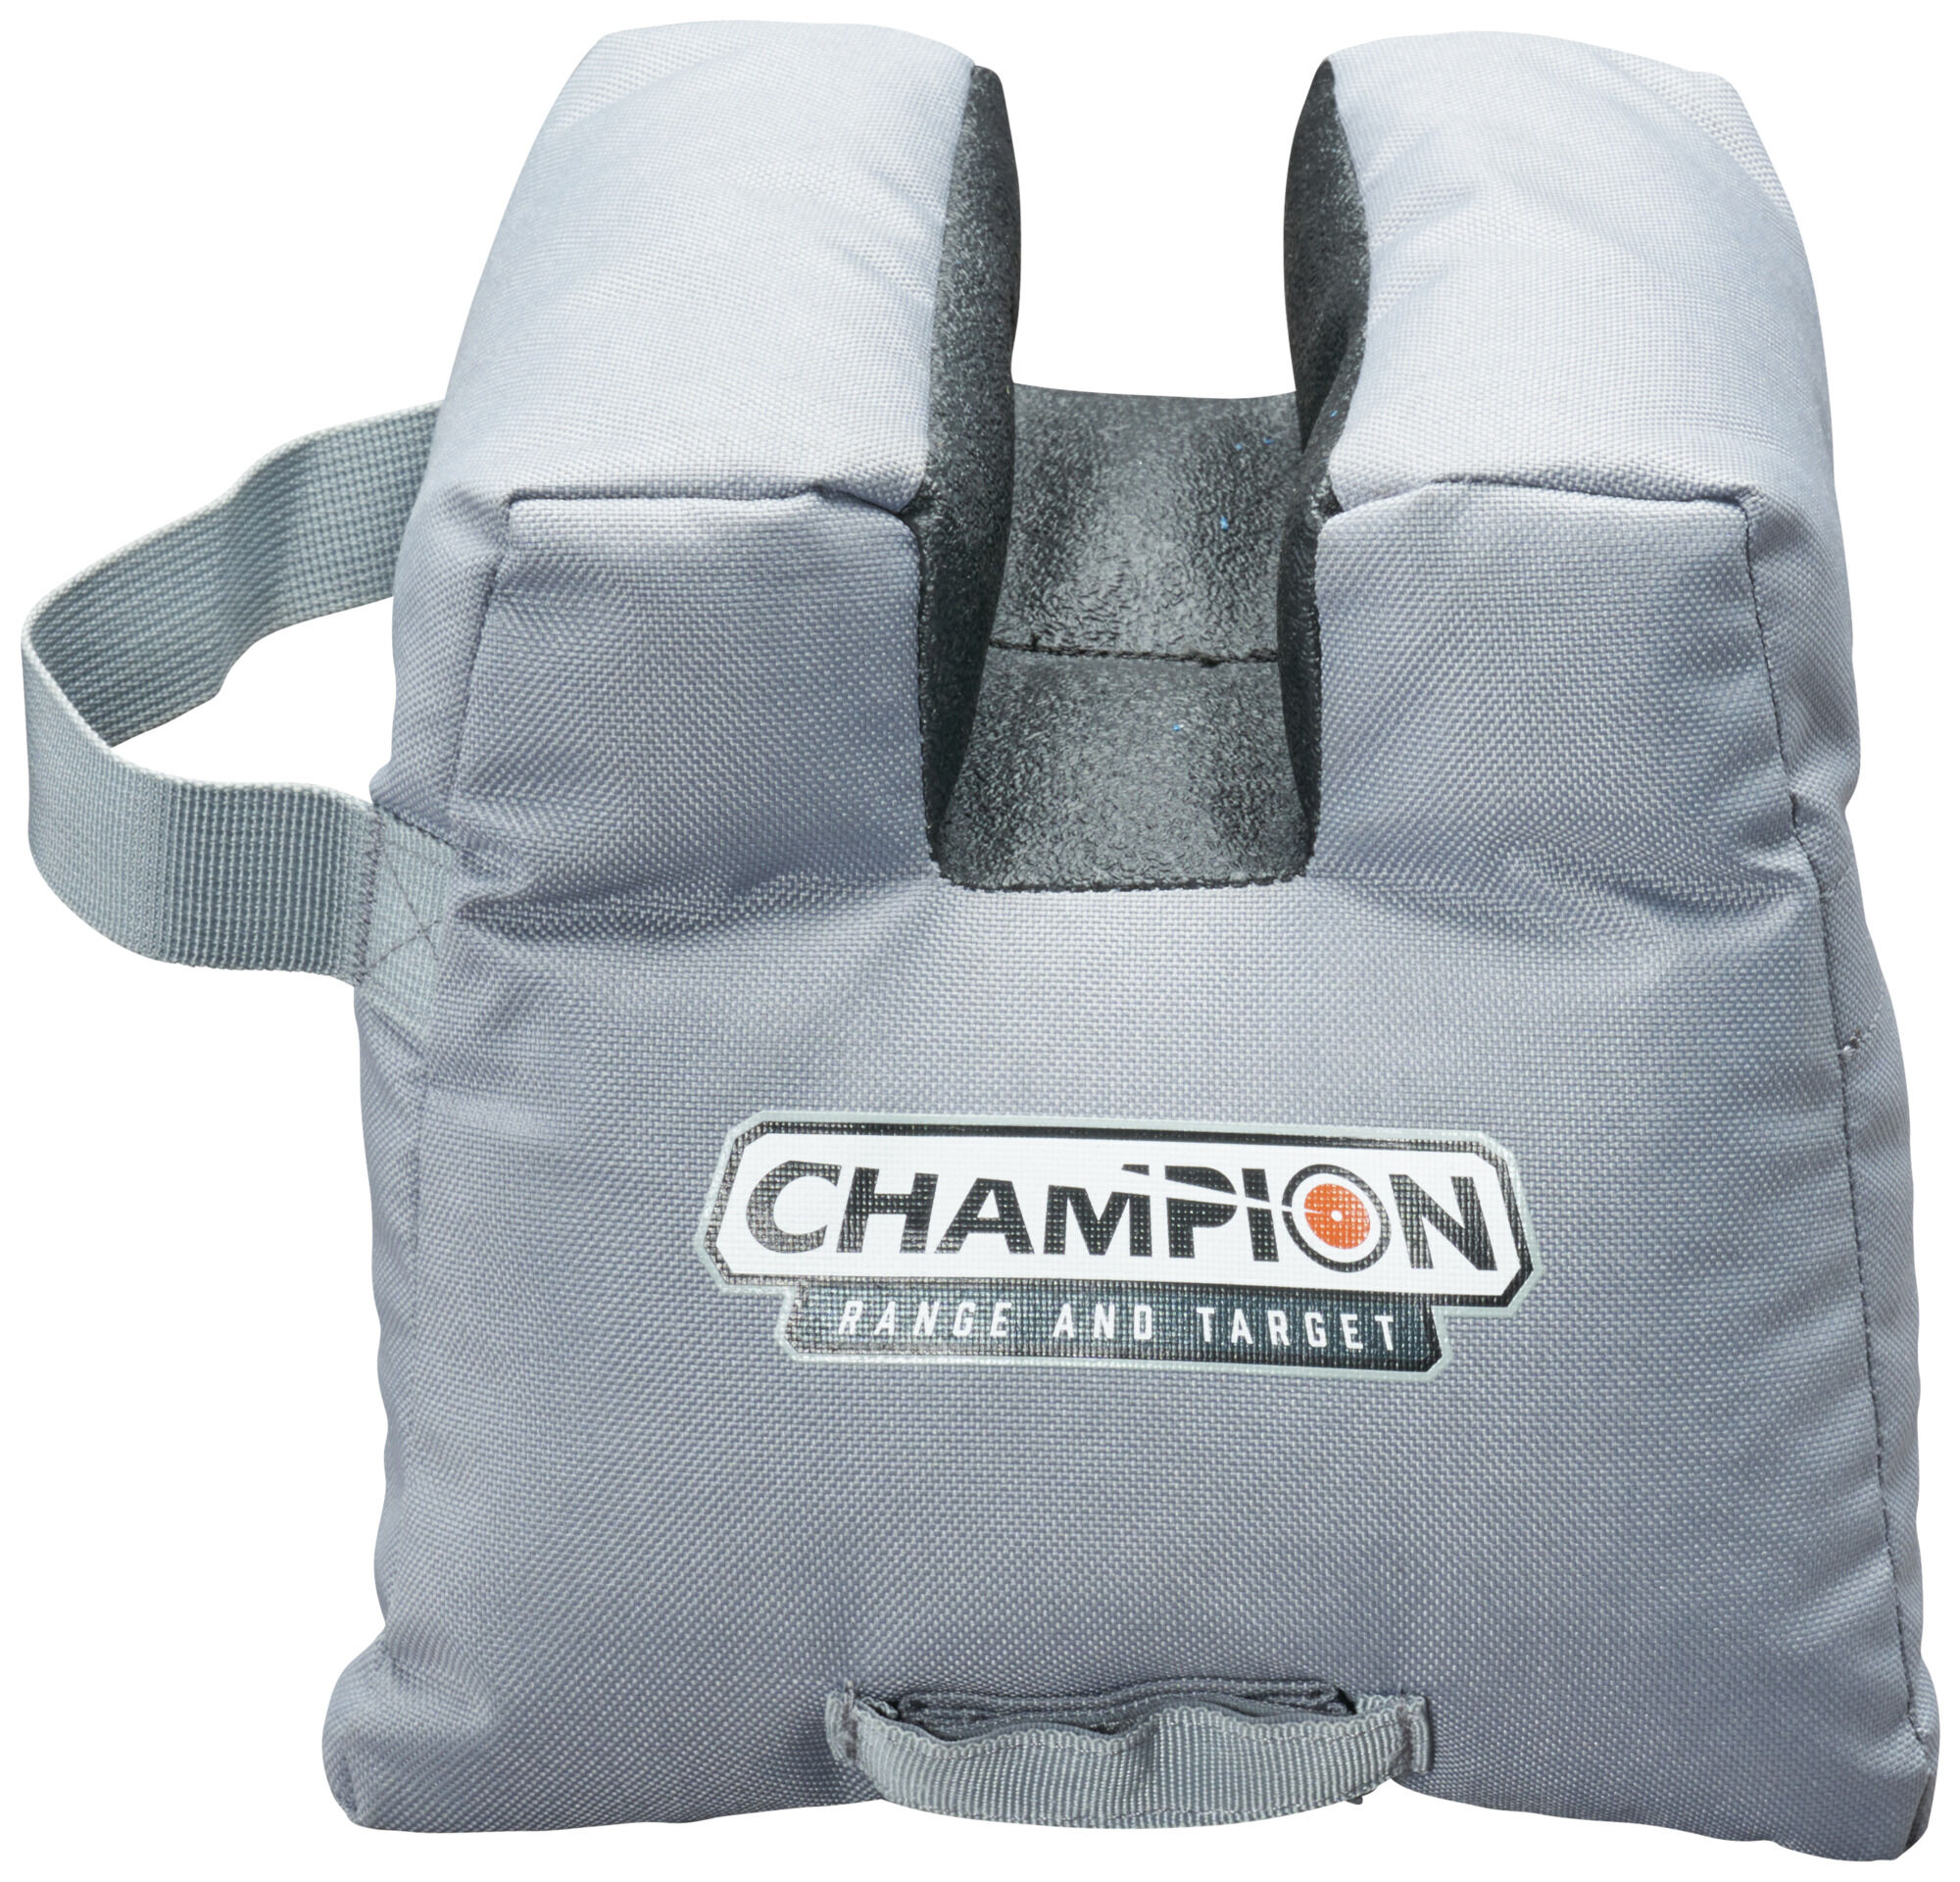 Details about   Champion Shooting Rest Accuracy X-Ringer Shooting Bag Multiple Position 40891 